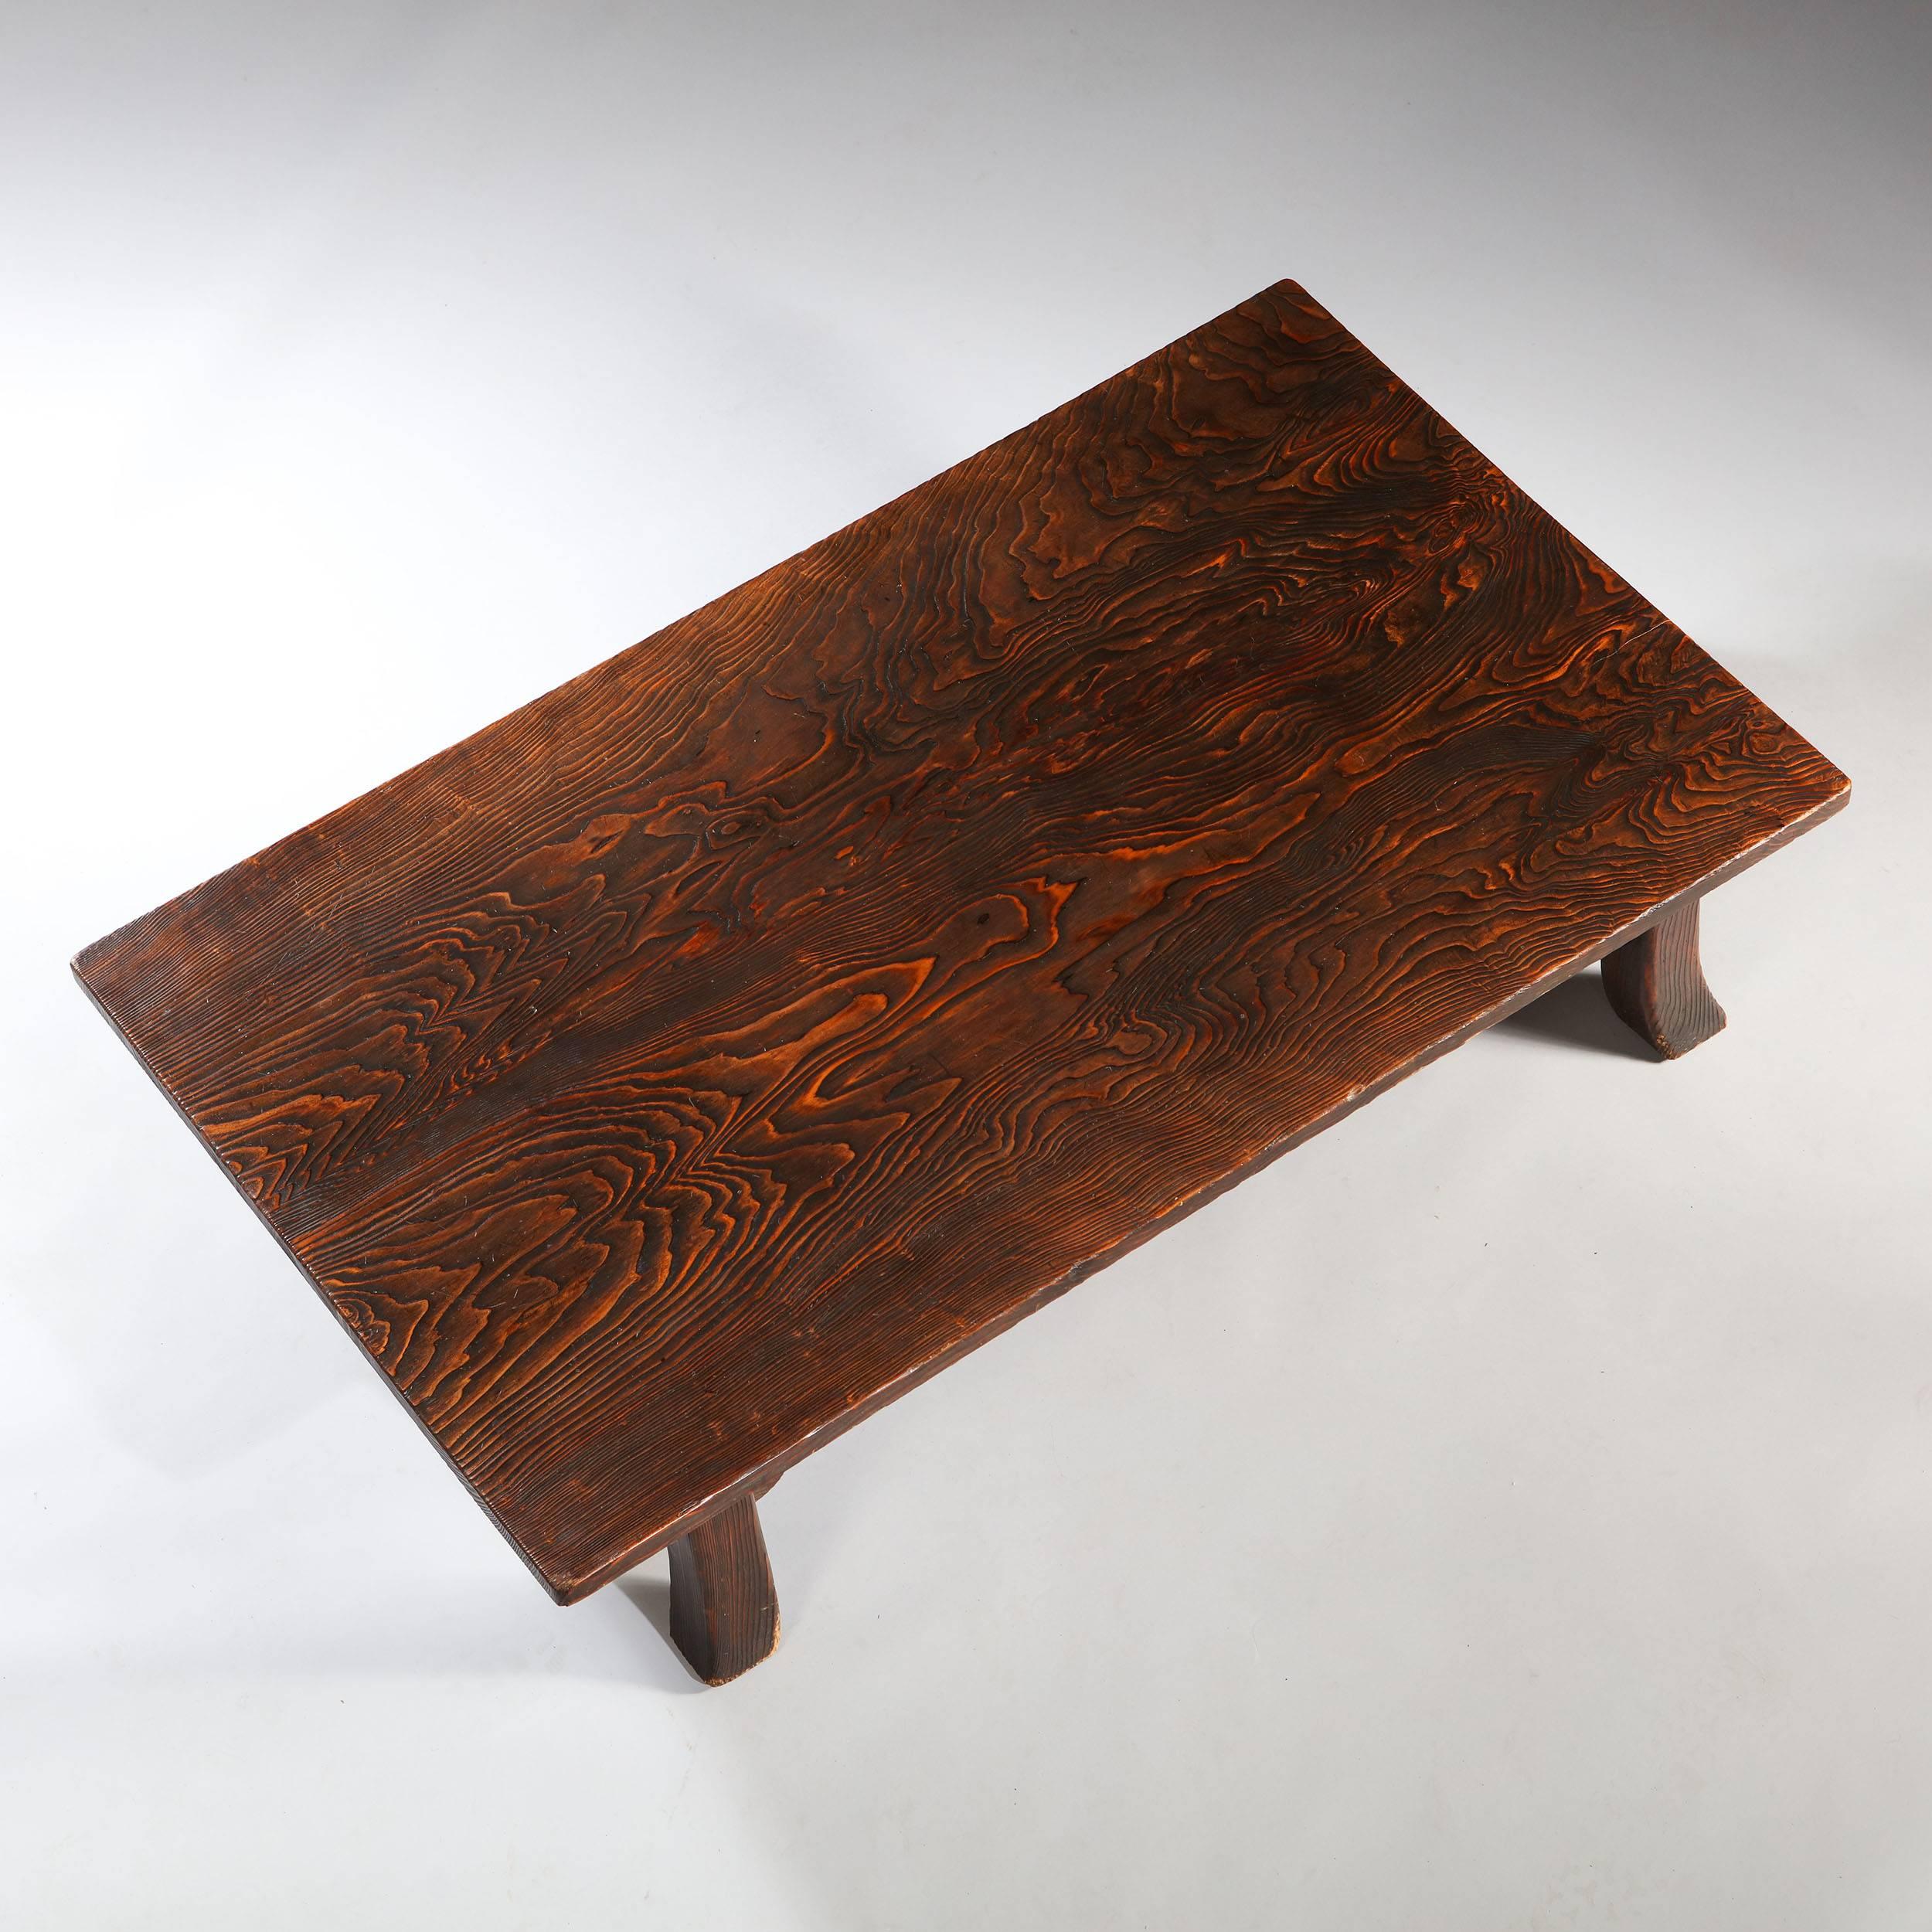 A very fine 19th century antique Japanese low table -  A traditional Japanese low table constructed from a incredible substantial cedar plank and raised on elegant out swept legs.

Japan, circa 1900

Measures: Height 30cm
Width 152cm
Depth